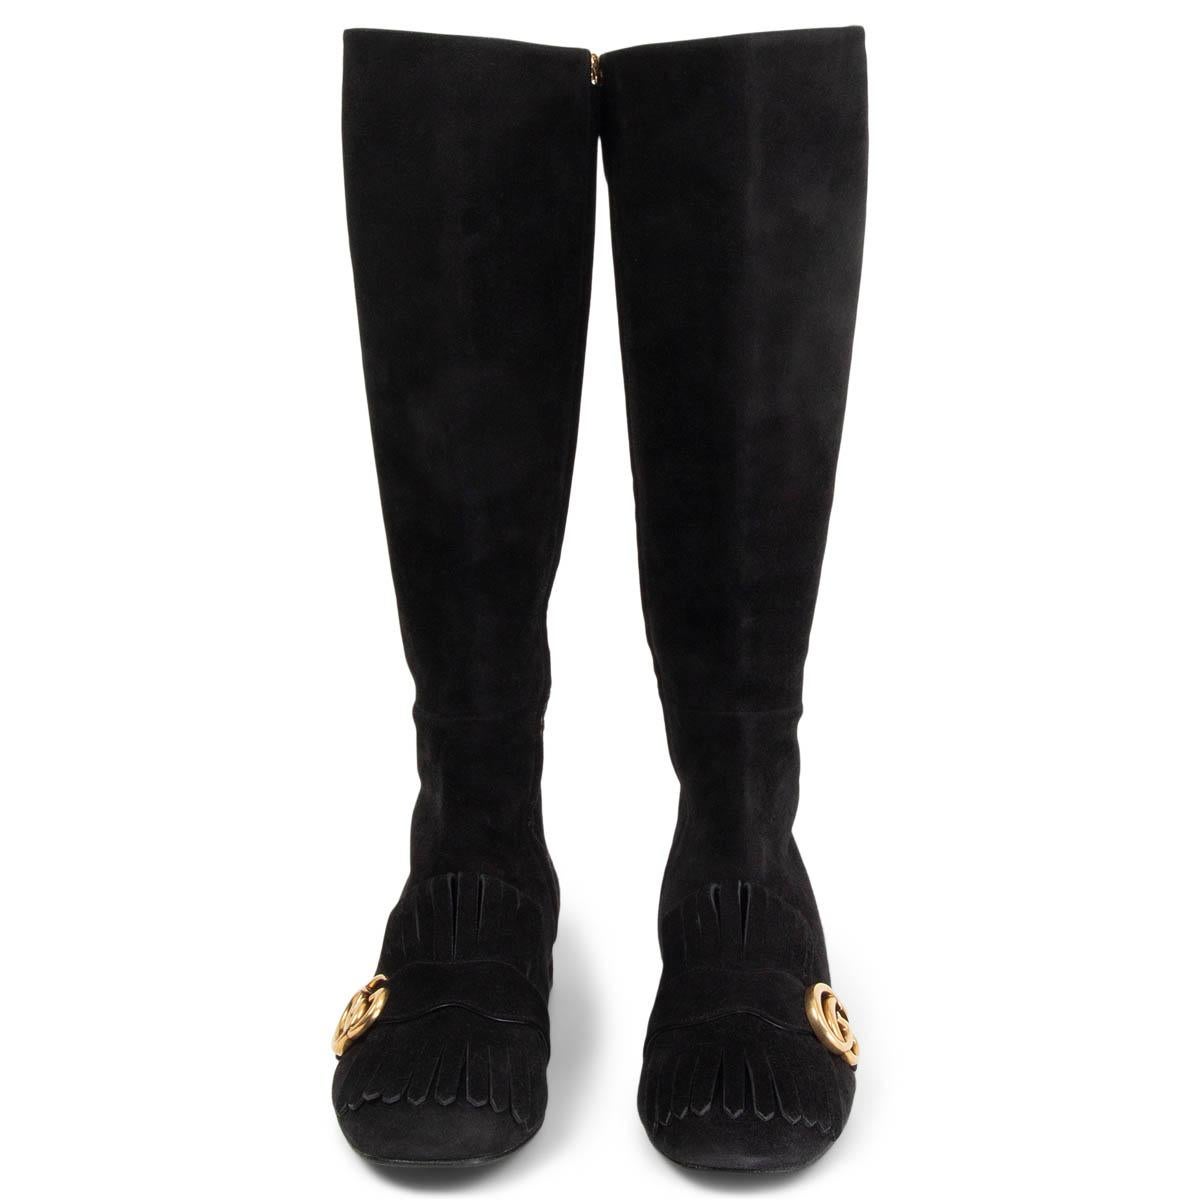 100% authentic Gucci Marmont GG fringe knee high boots in black suede. Open with a zipper on the inside. Have been worn and are in excellent condition. Rubber sole has been added. 

Measurements
Imprinted Size	38.5
Shoe Size	38.5
Inside Sole	25.5cm